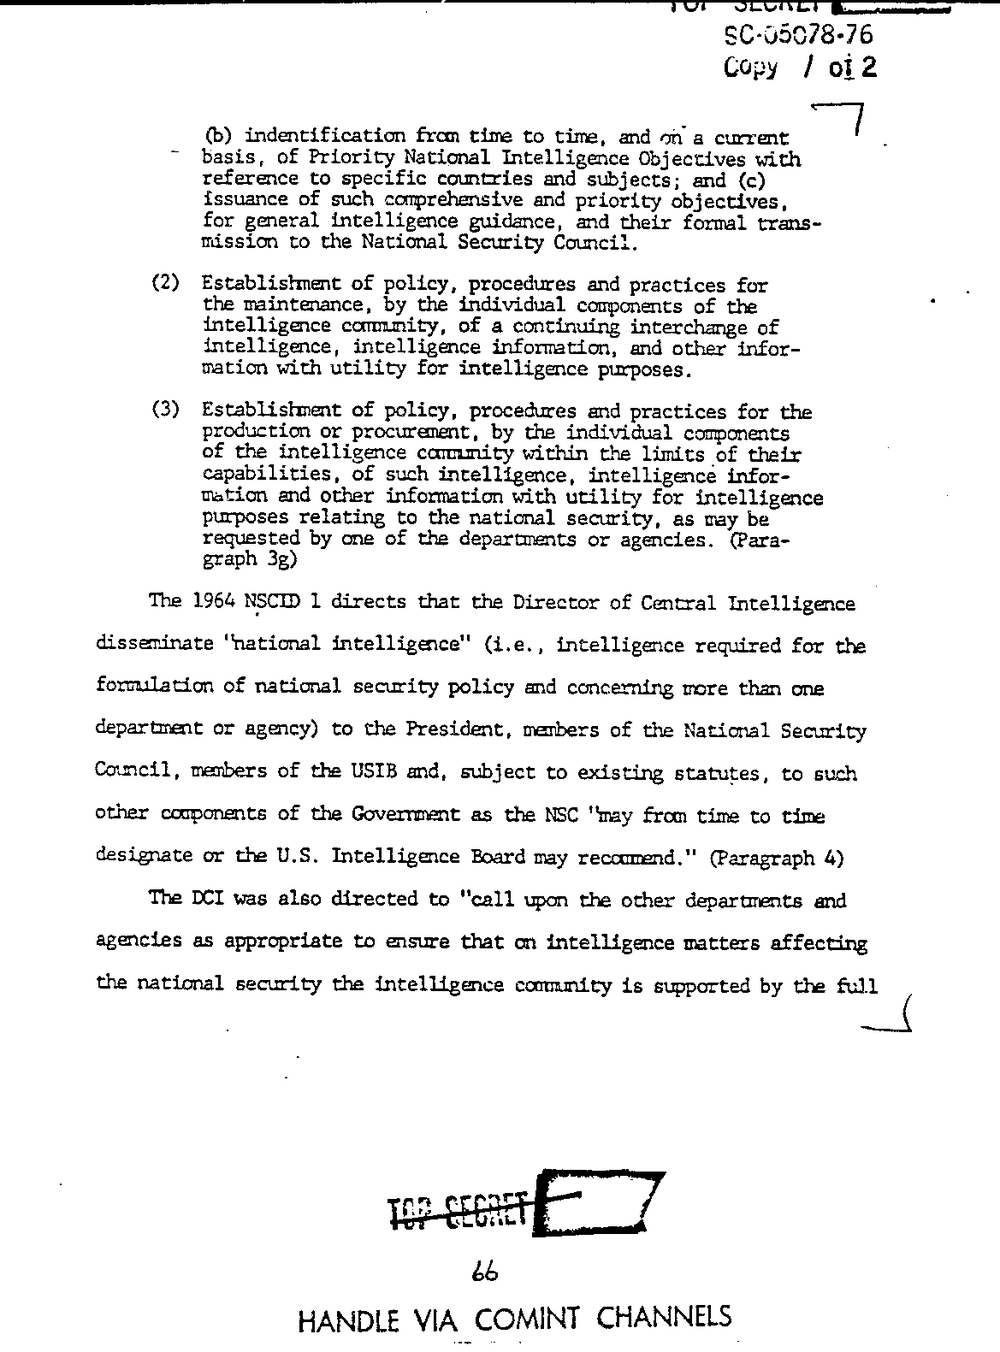 Page 74 from Report on Inquiry Into CIA Related Electronic Surveillance Activities